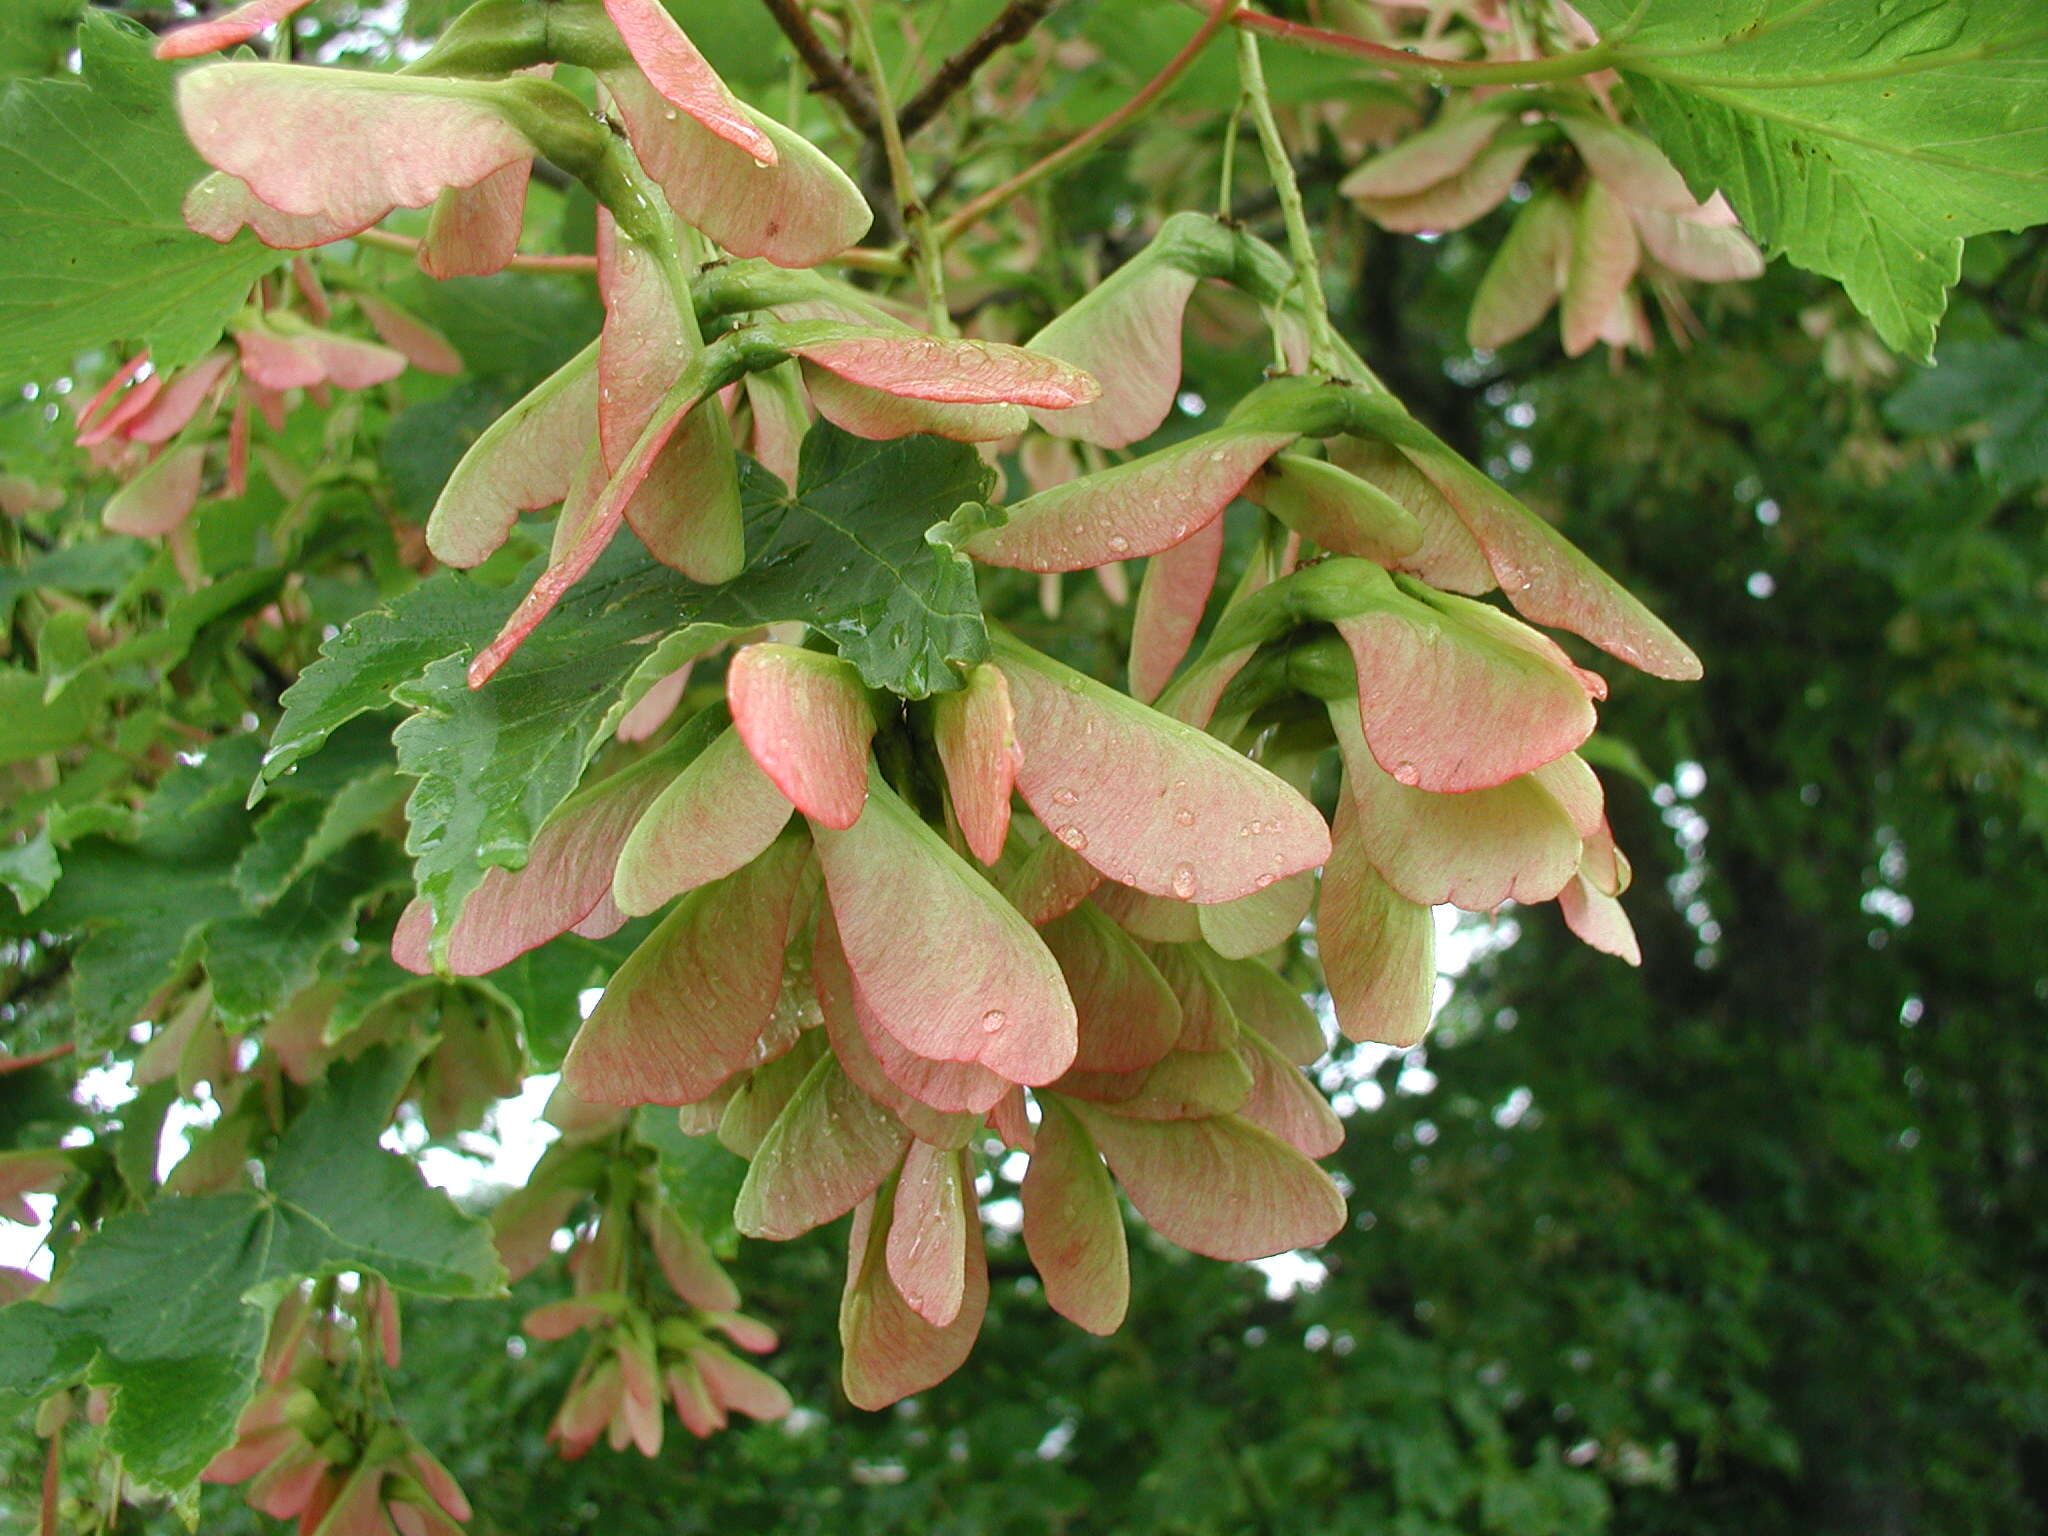 Image of Birch-leafed Maple